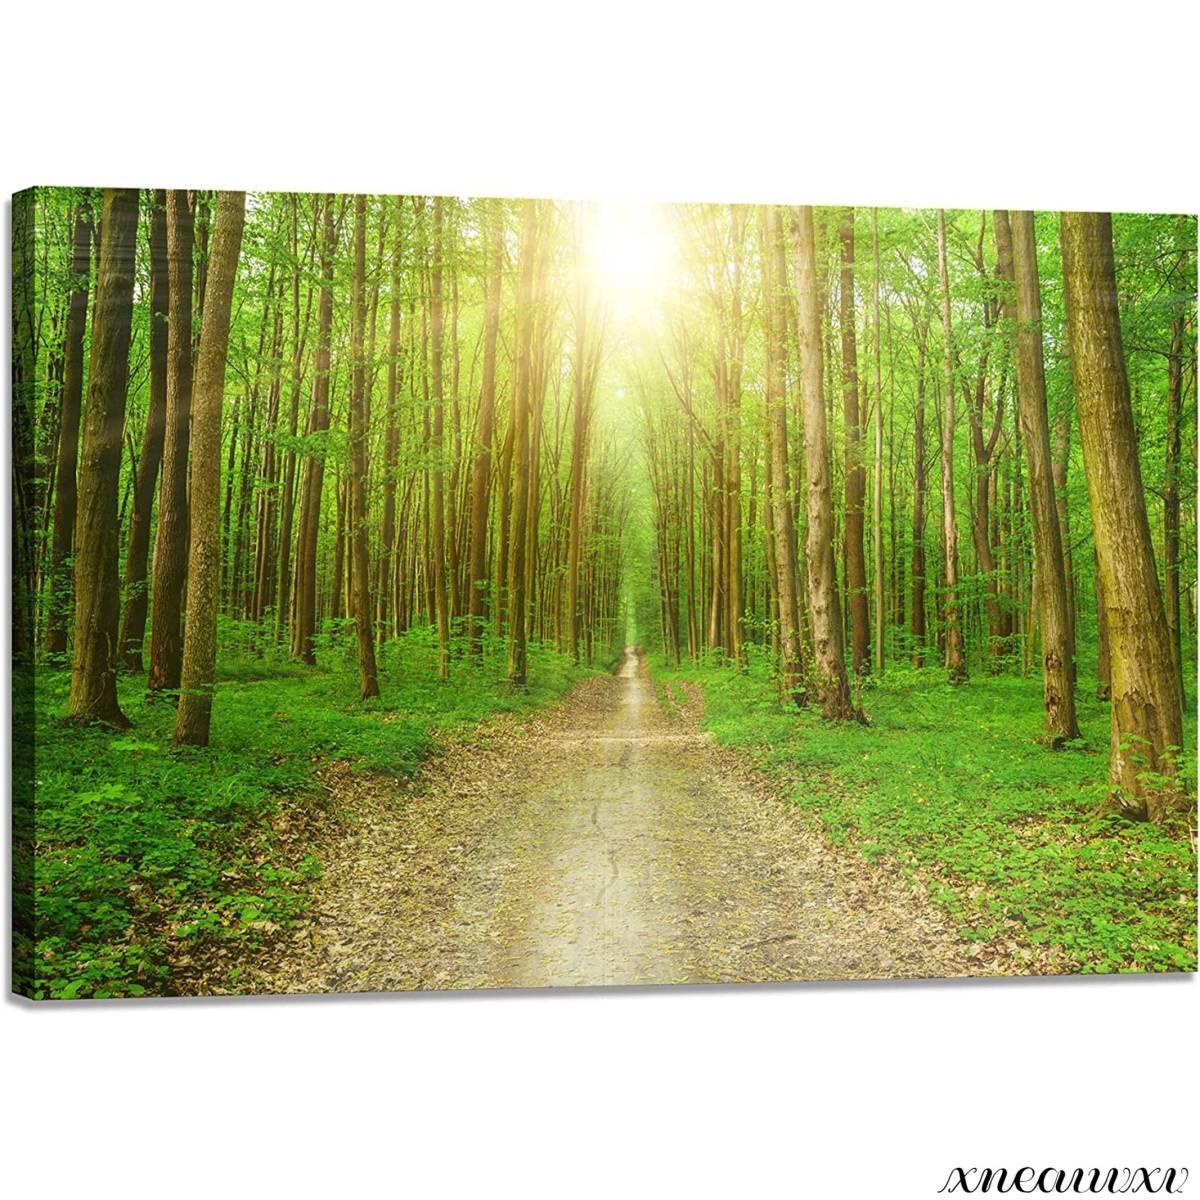 Light in the Forest Art Panel Nature Interior Landscape Wall Hanging Room Decoration Decorative Painting Canvas Painting Stylish Good Luck Overseas Art Appreciation Redecoration, Artwork, Painting, graphic